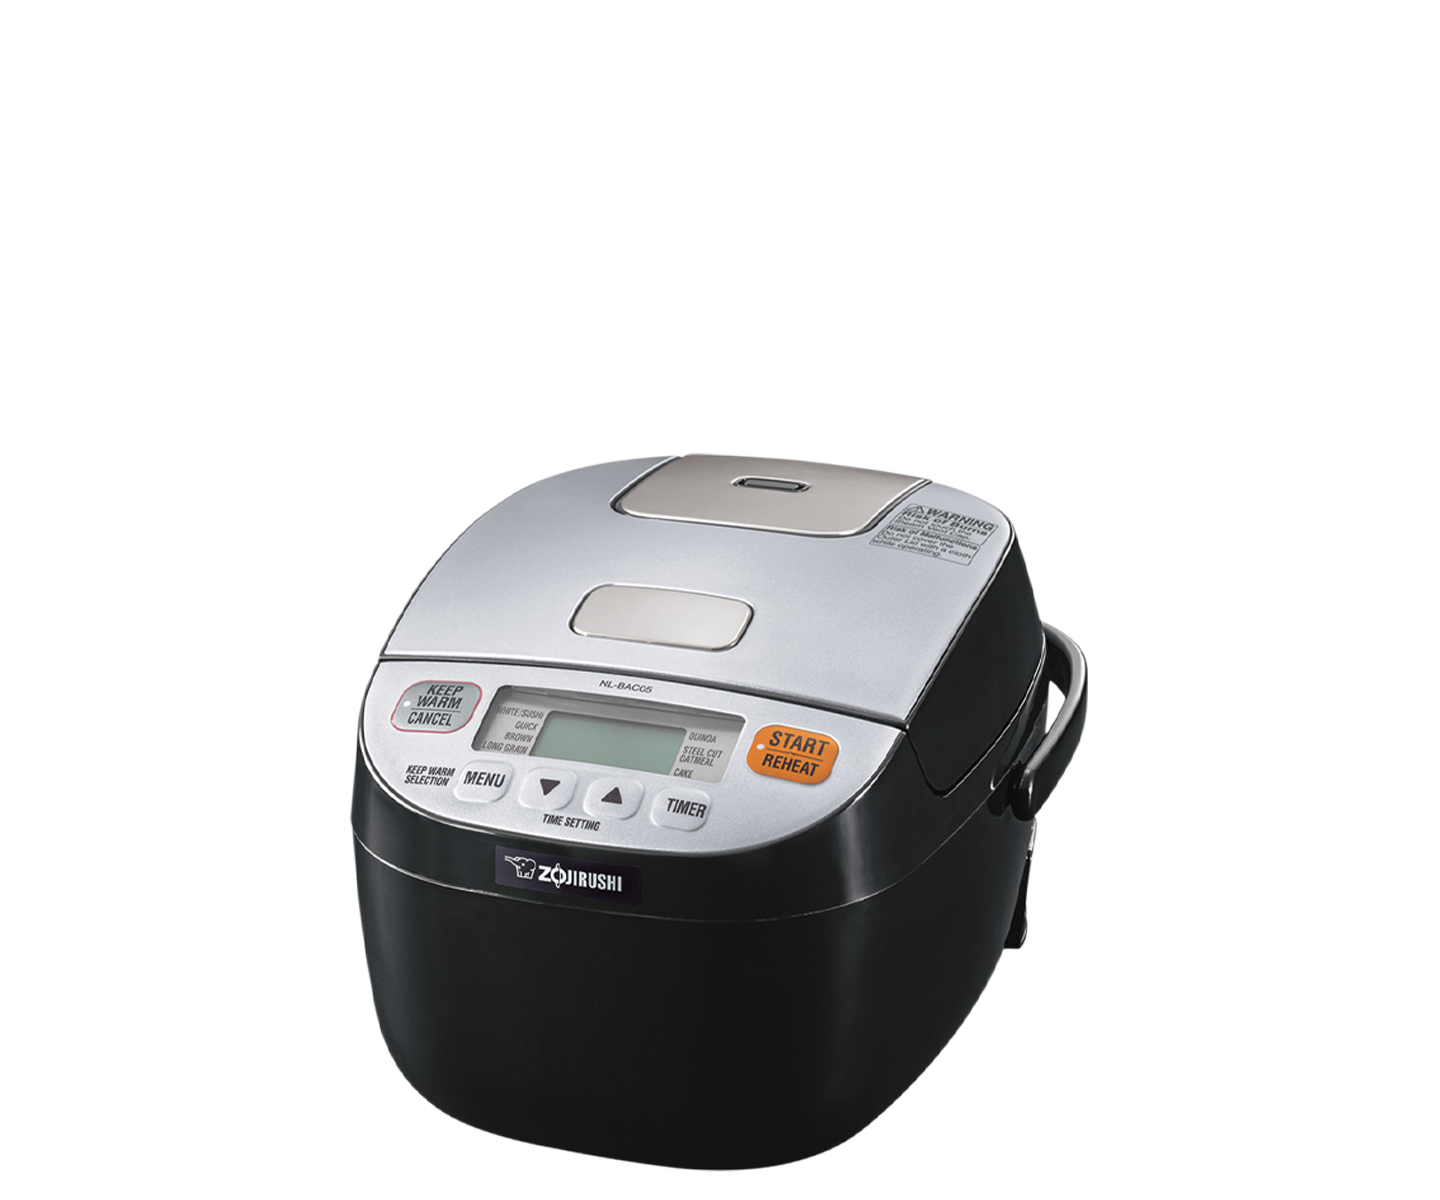 Zojirushi Micom Rice Cooker & Warmer, 3 Cup (Uncooked), Stainless Black &  Reviews